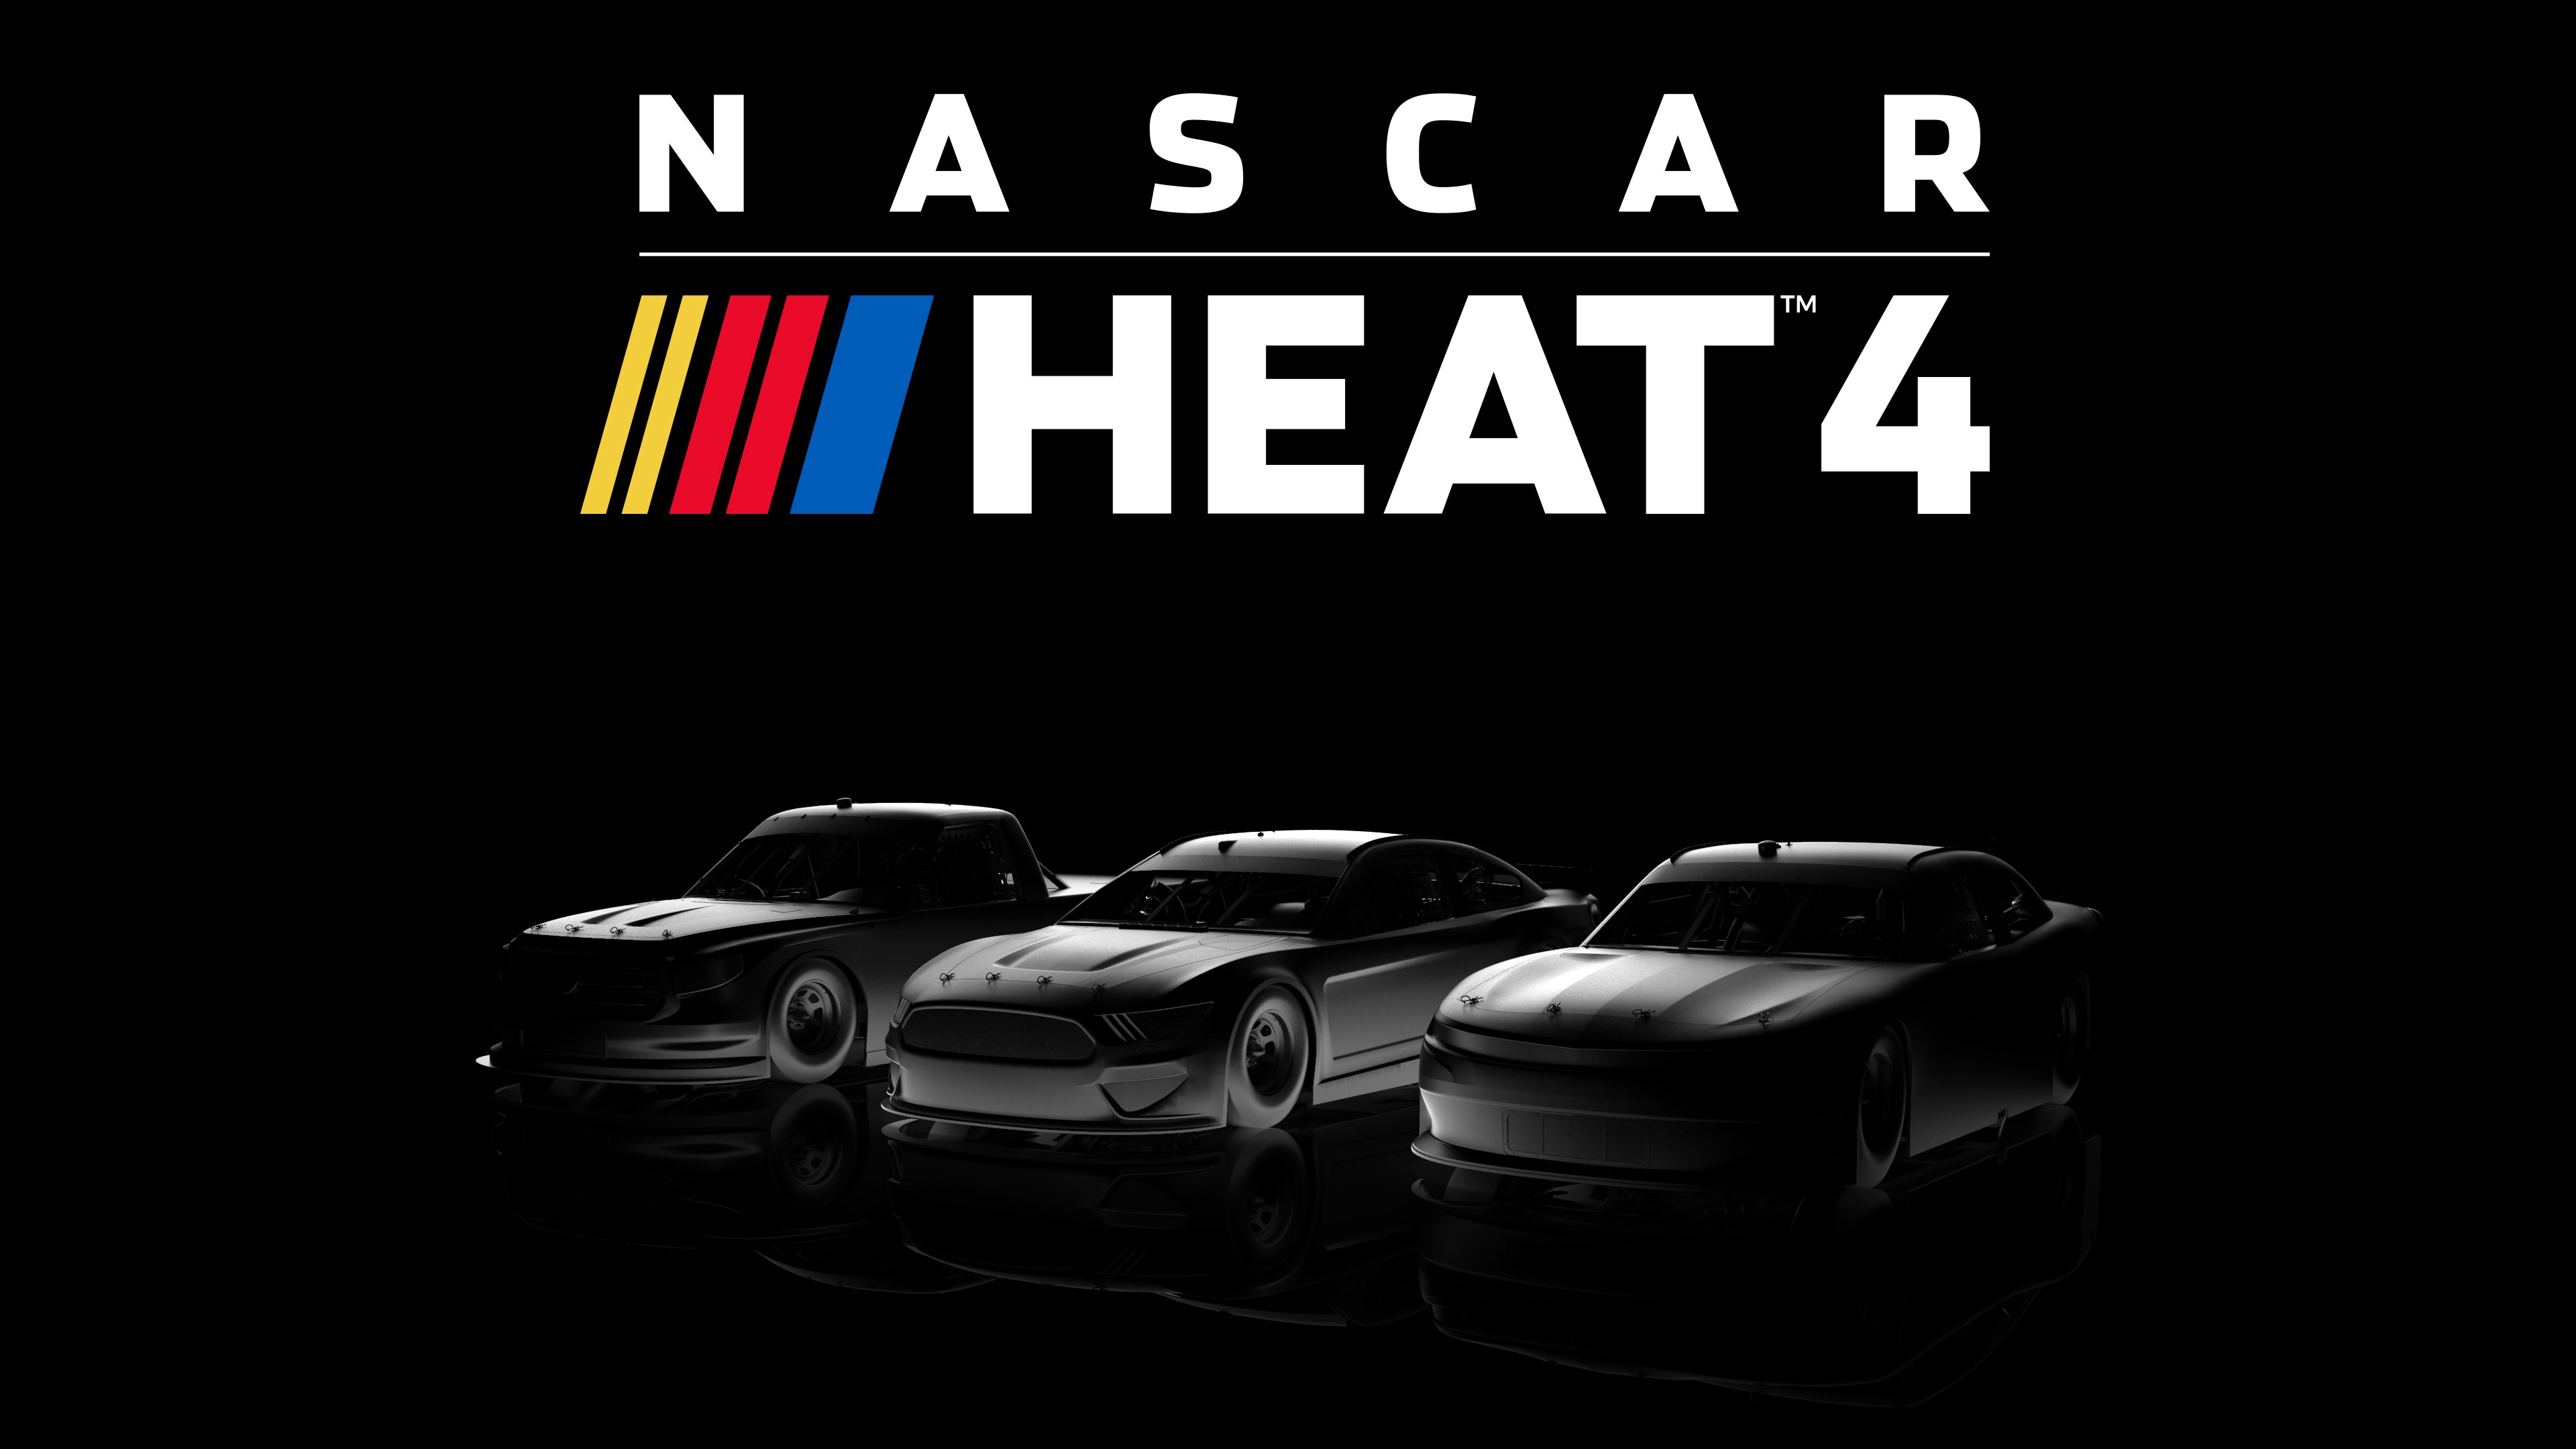 NASCAR Heat 4 wallpaper based off the roster announcement image